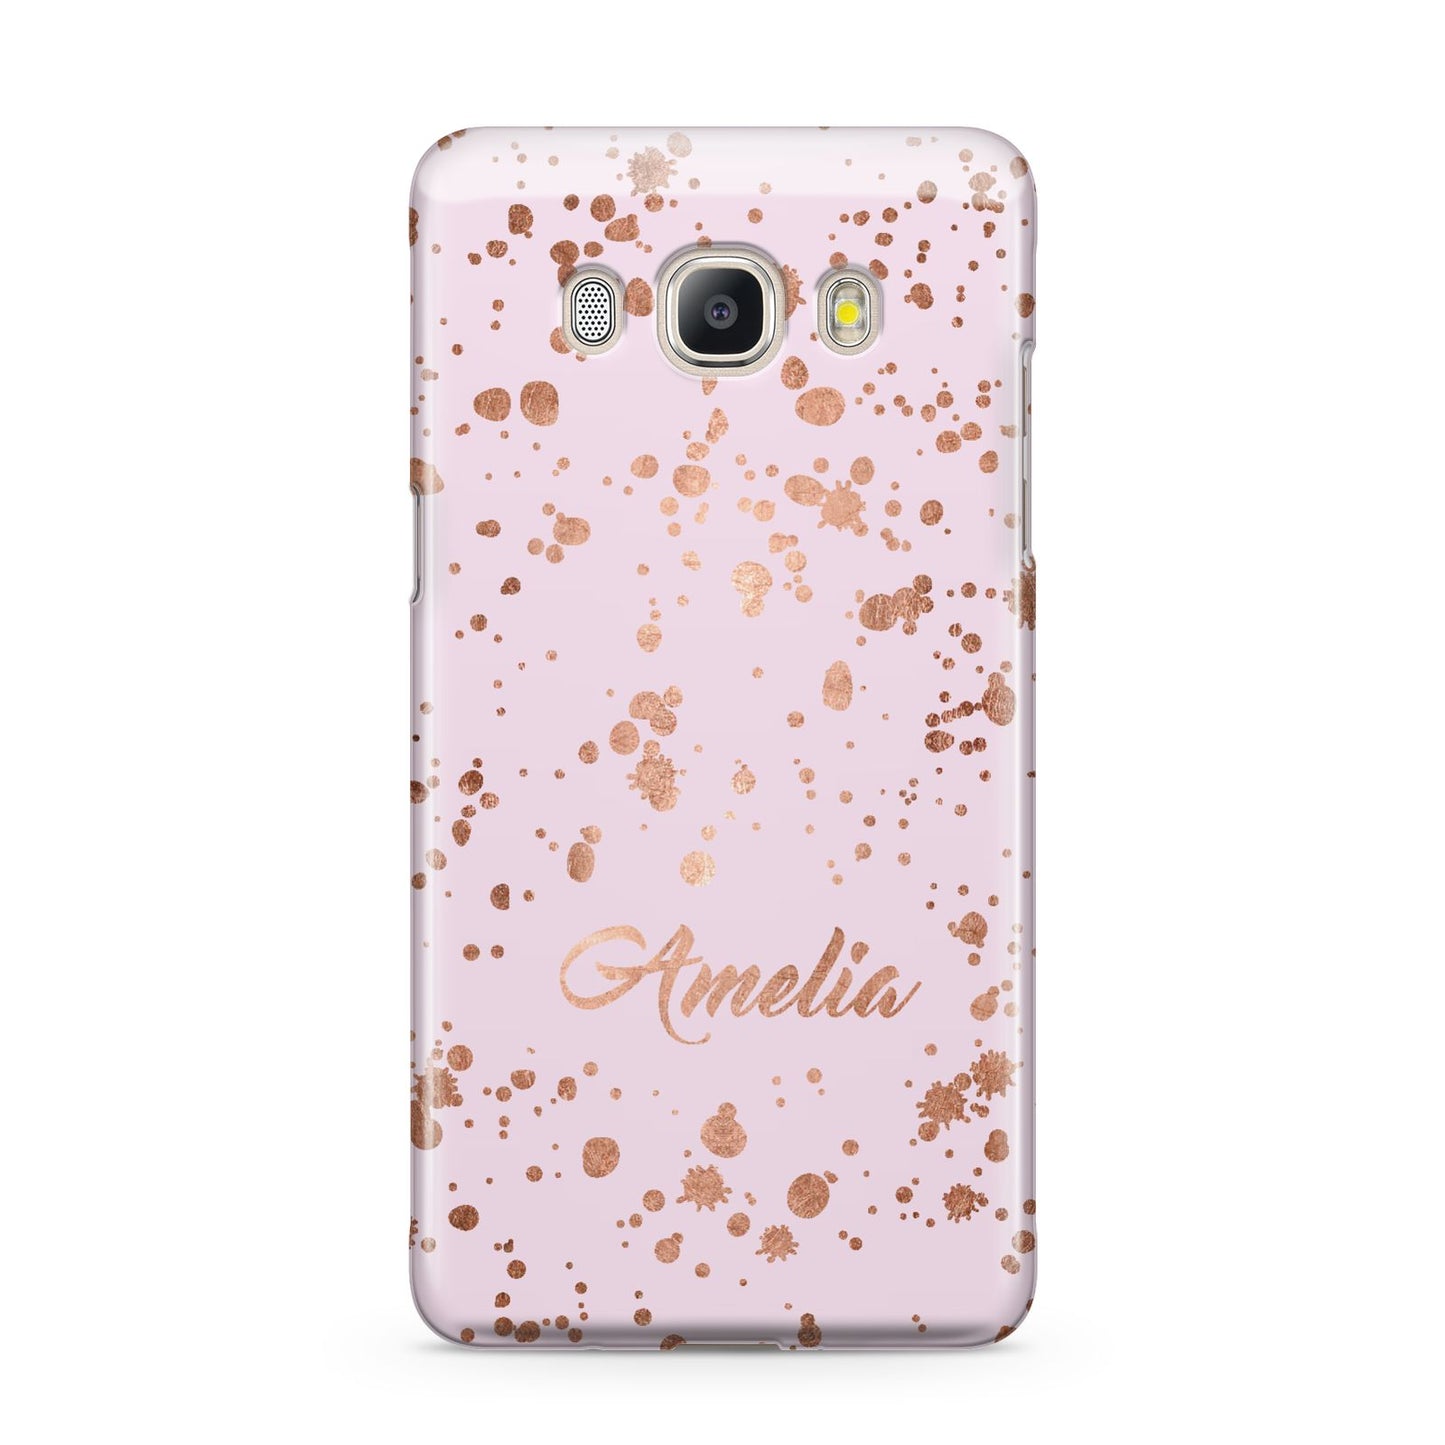 Personalised Pink Copper Splats Name Samsung Galaxy J5 2016 Case